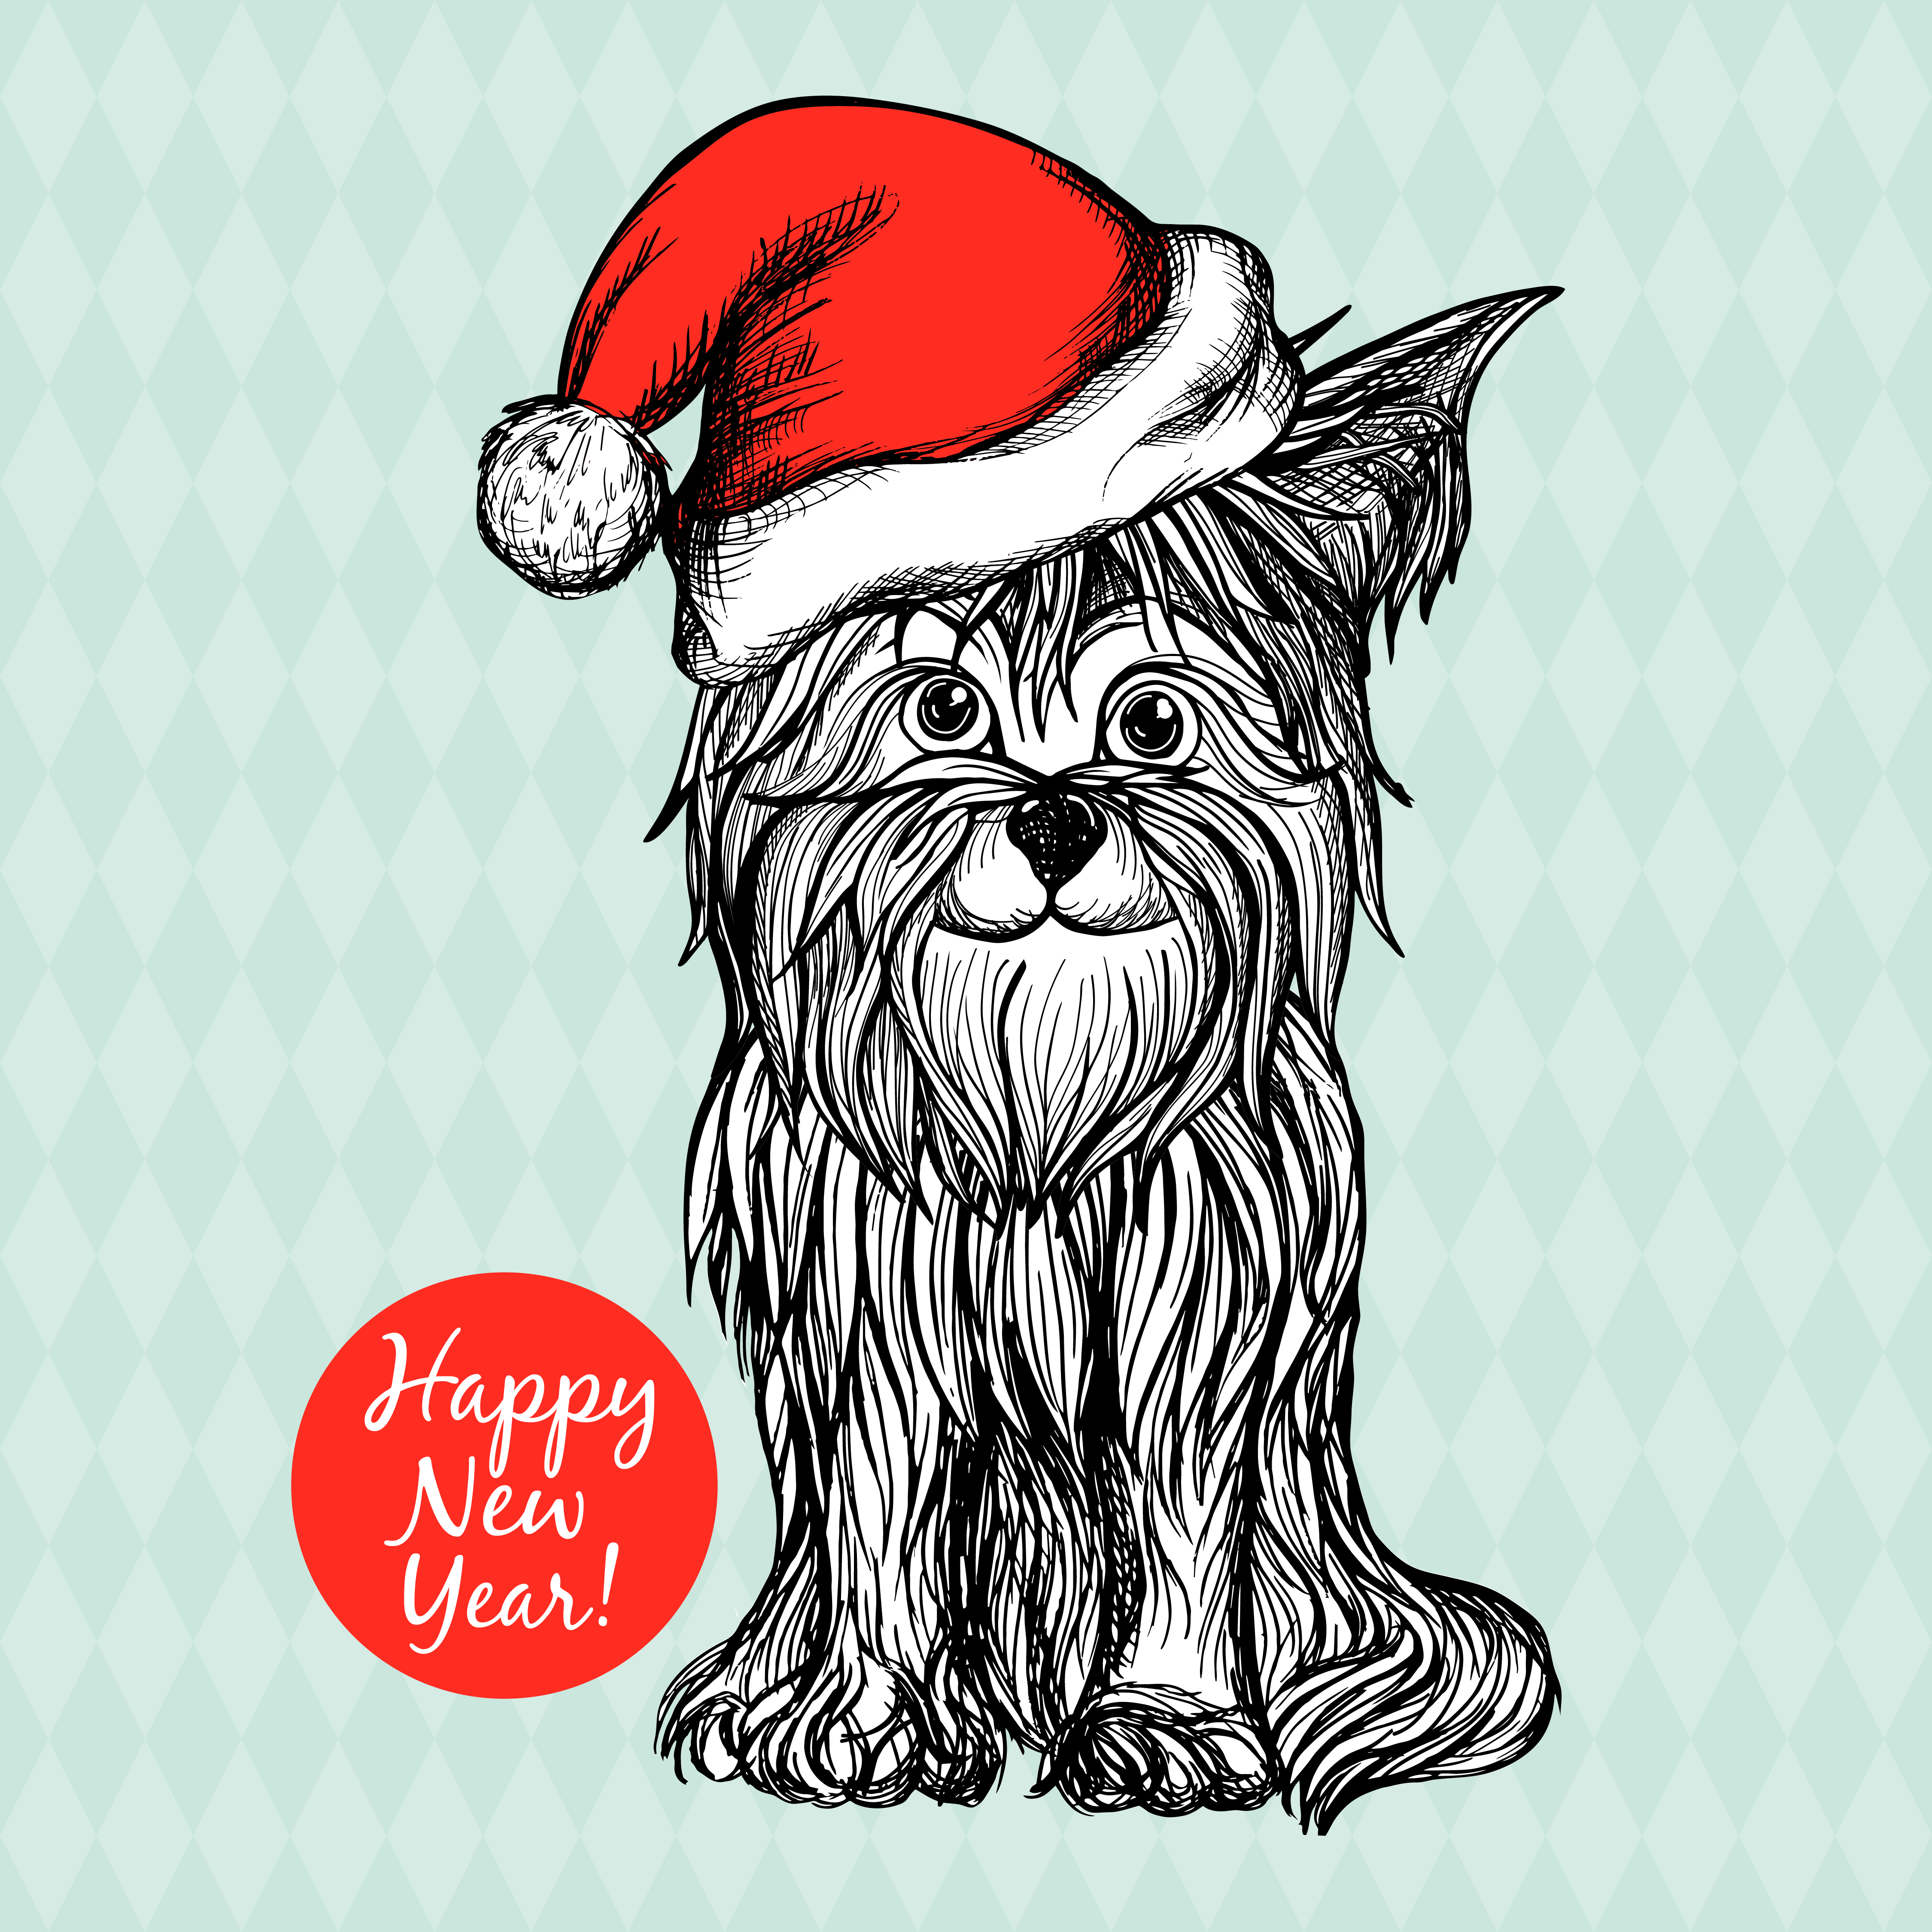 Download Dog In Christmas Hat - Download Free Vectors, Clipart ...